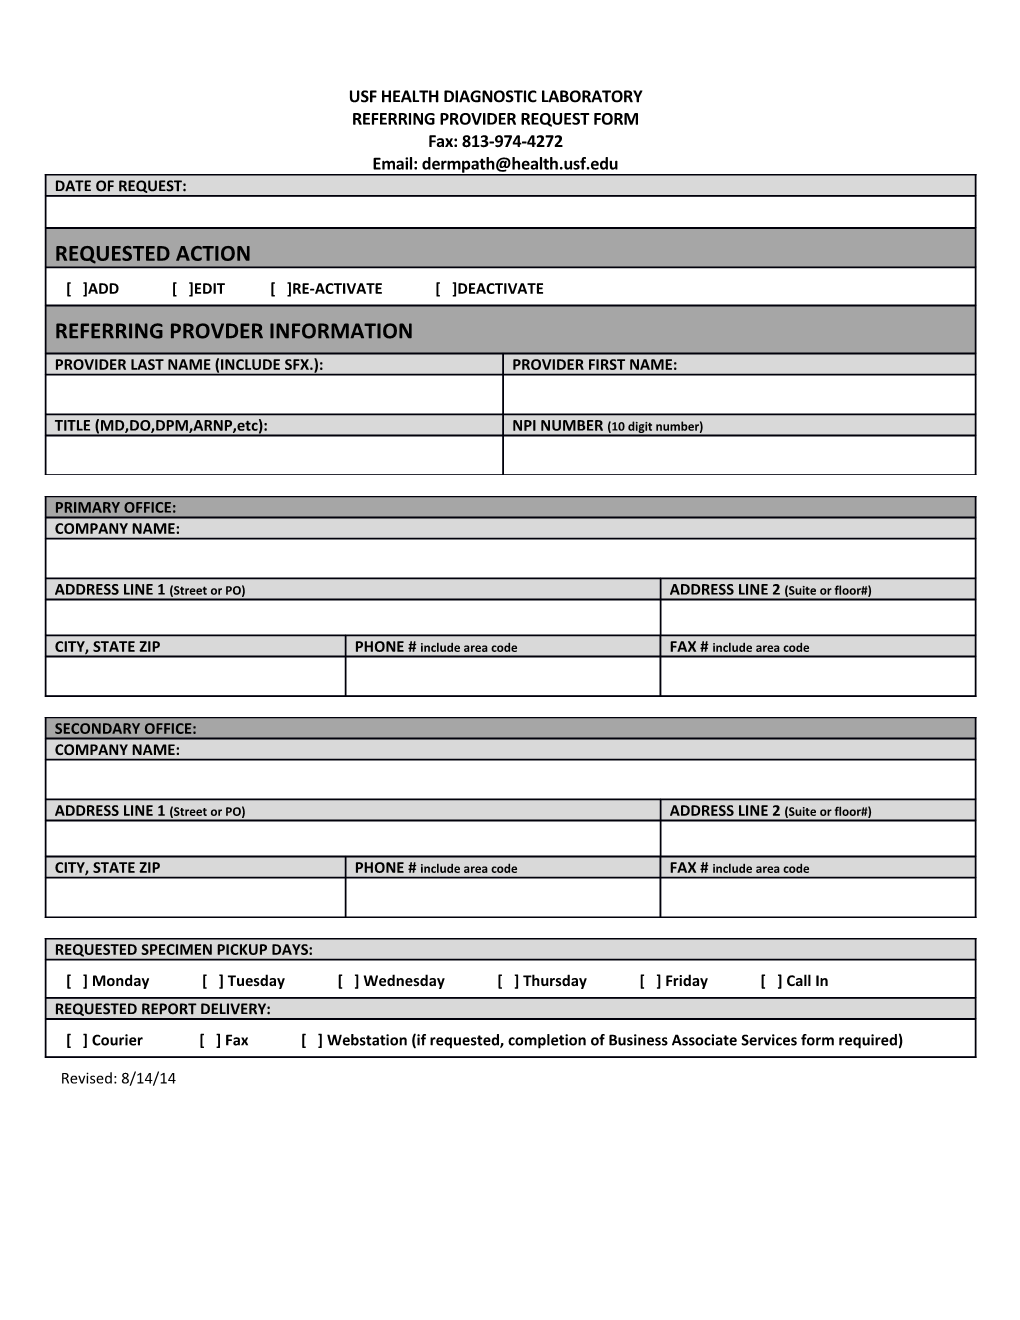 Referring Provider Request Form